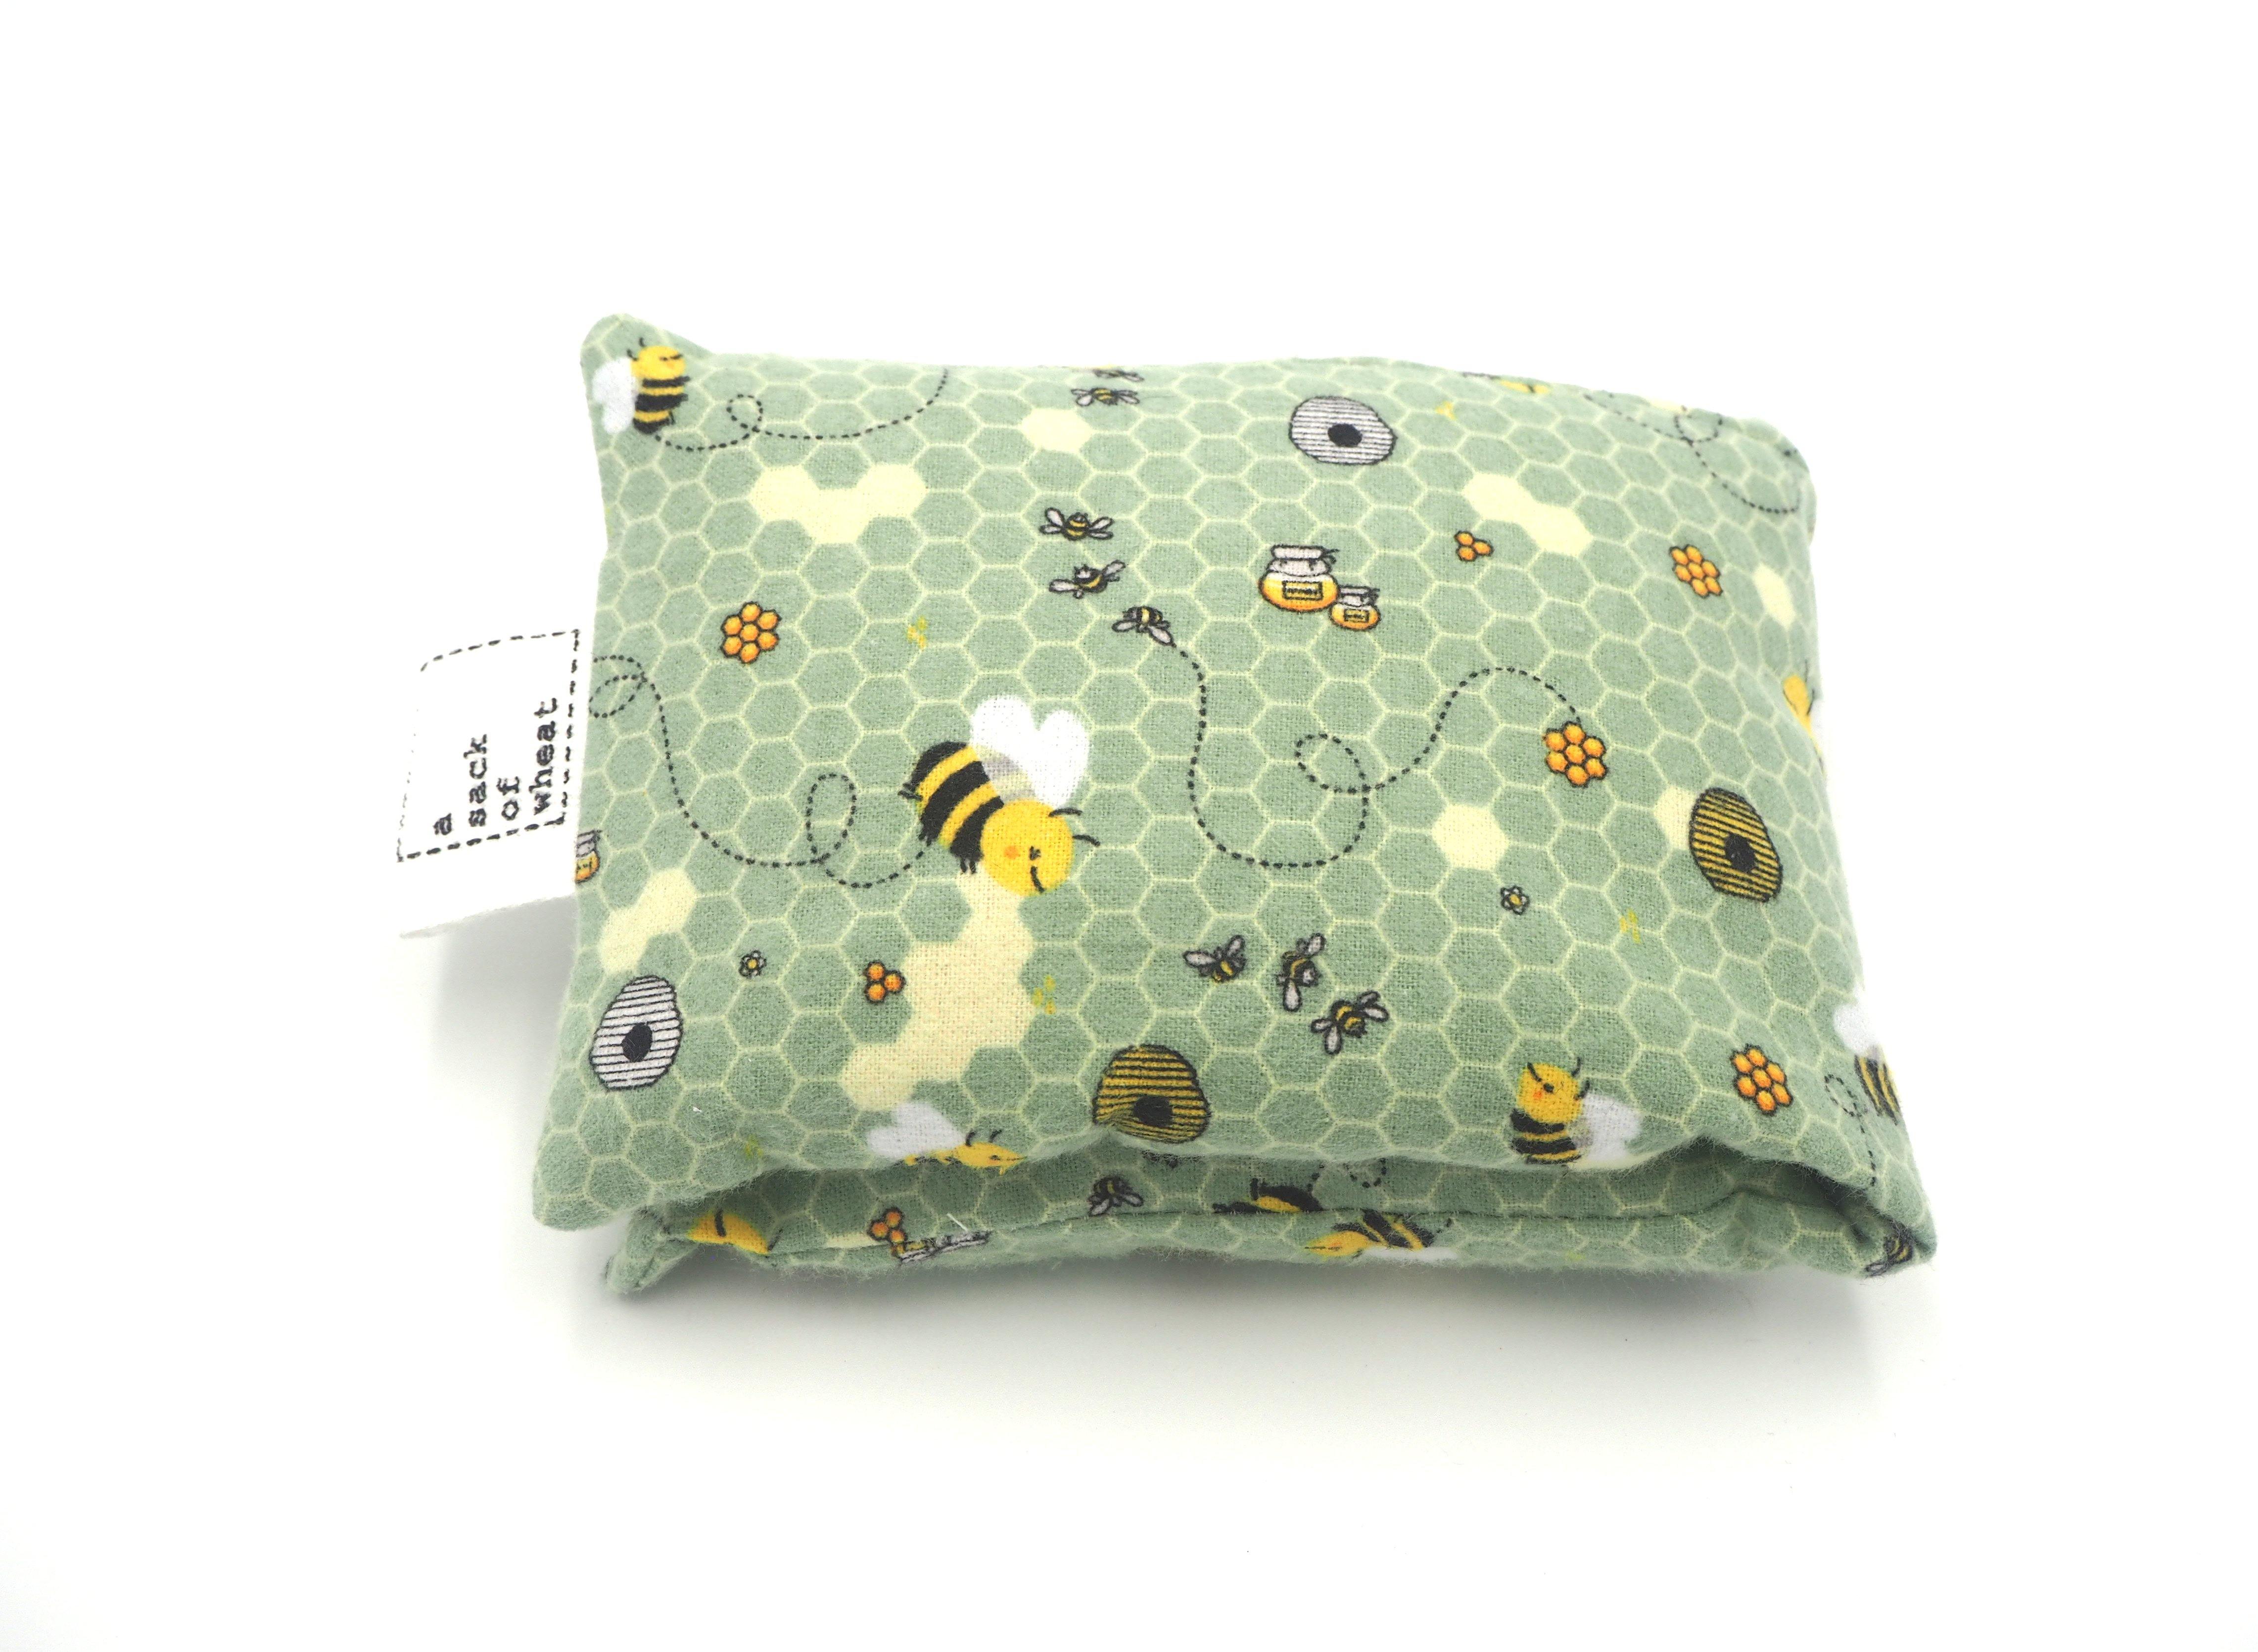 Folded view of A Sack Of Wheat, in a Busy Bee's making Honey print, 100% cotton Flannelette fabric